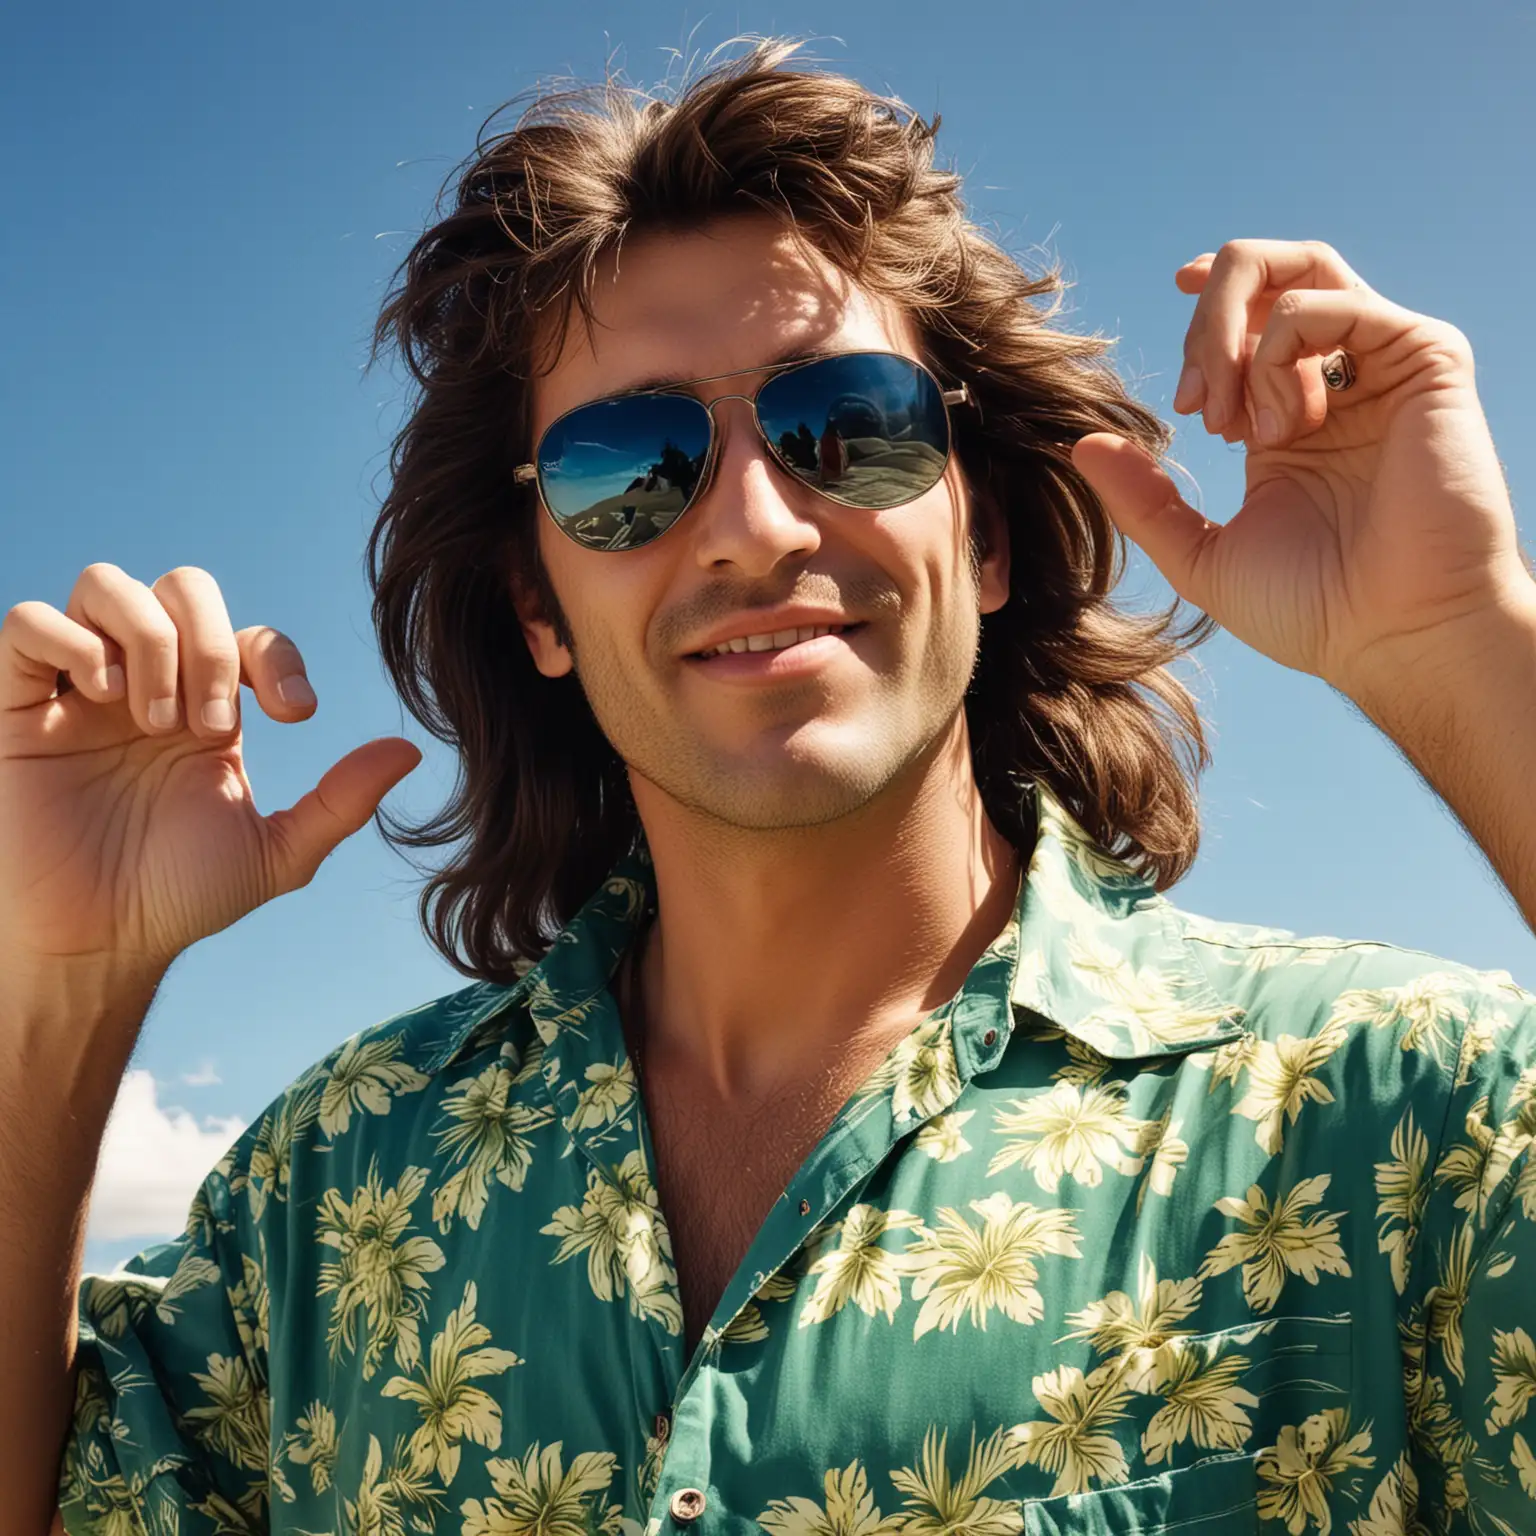 Retro Style Man with Thick Hair Wearing Sunglasses and Hawaiian Shirt under Blue Skies